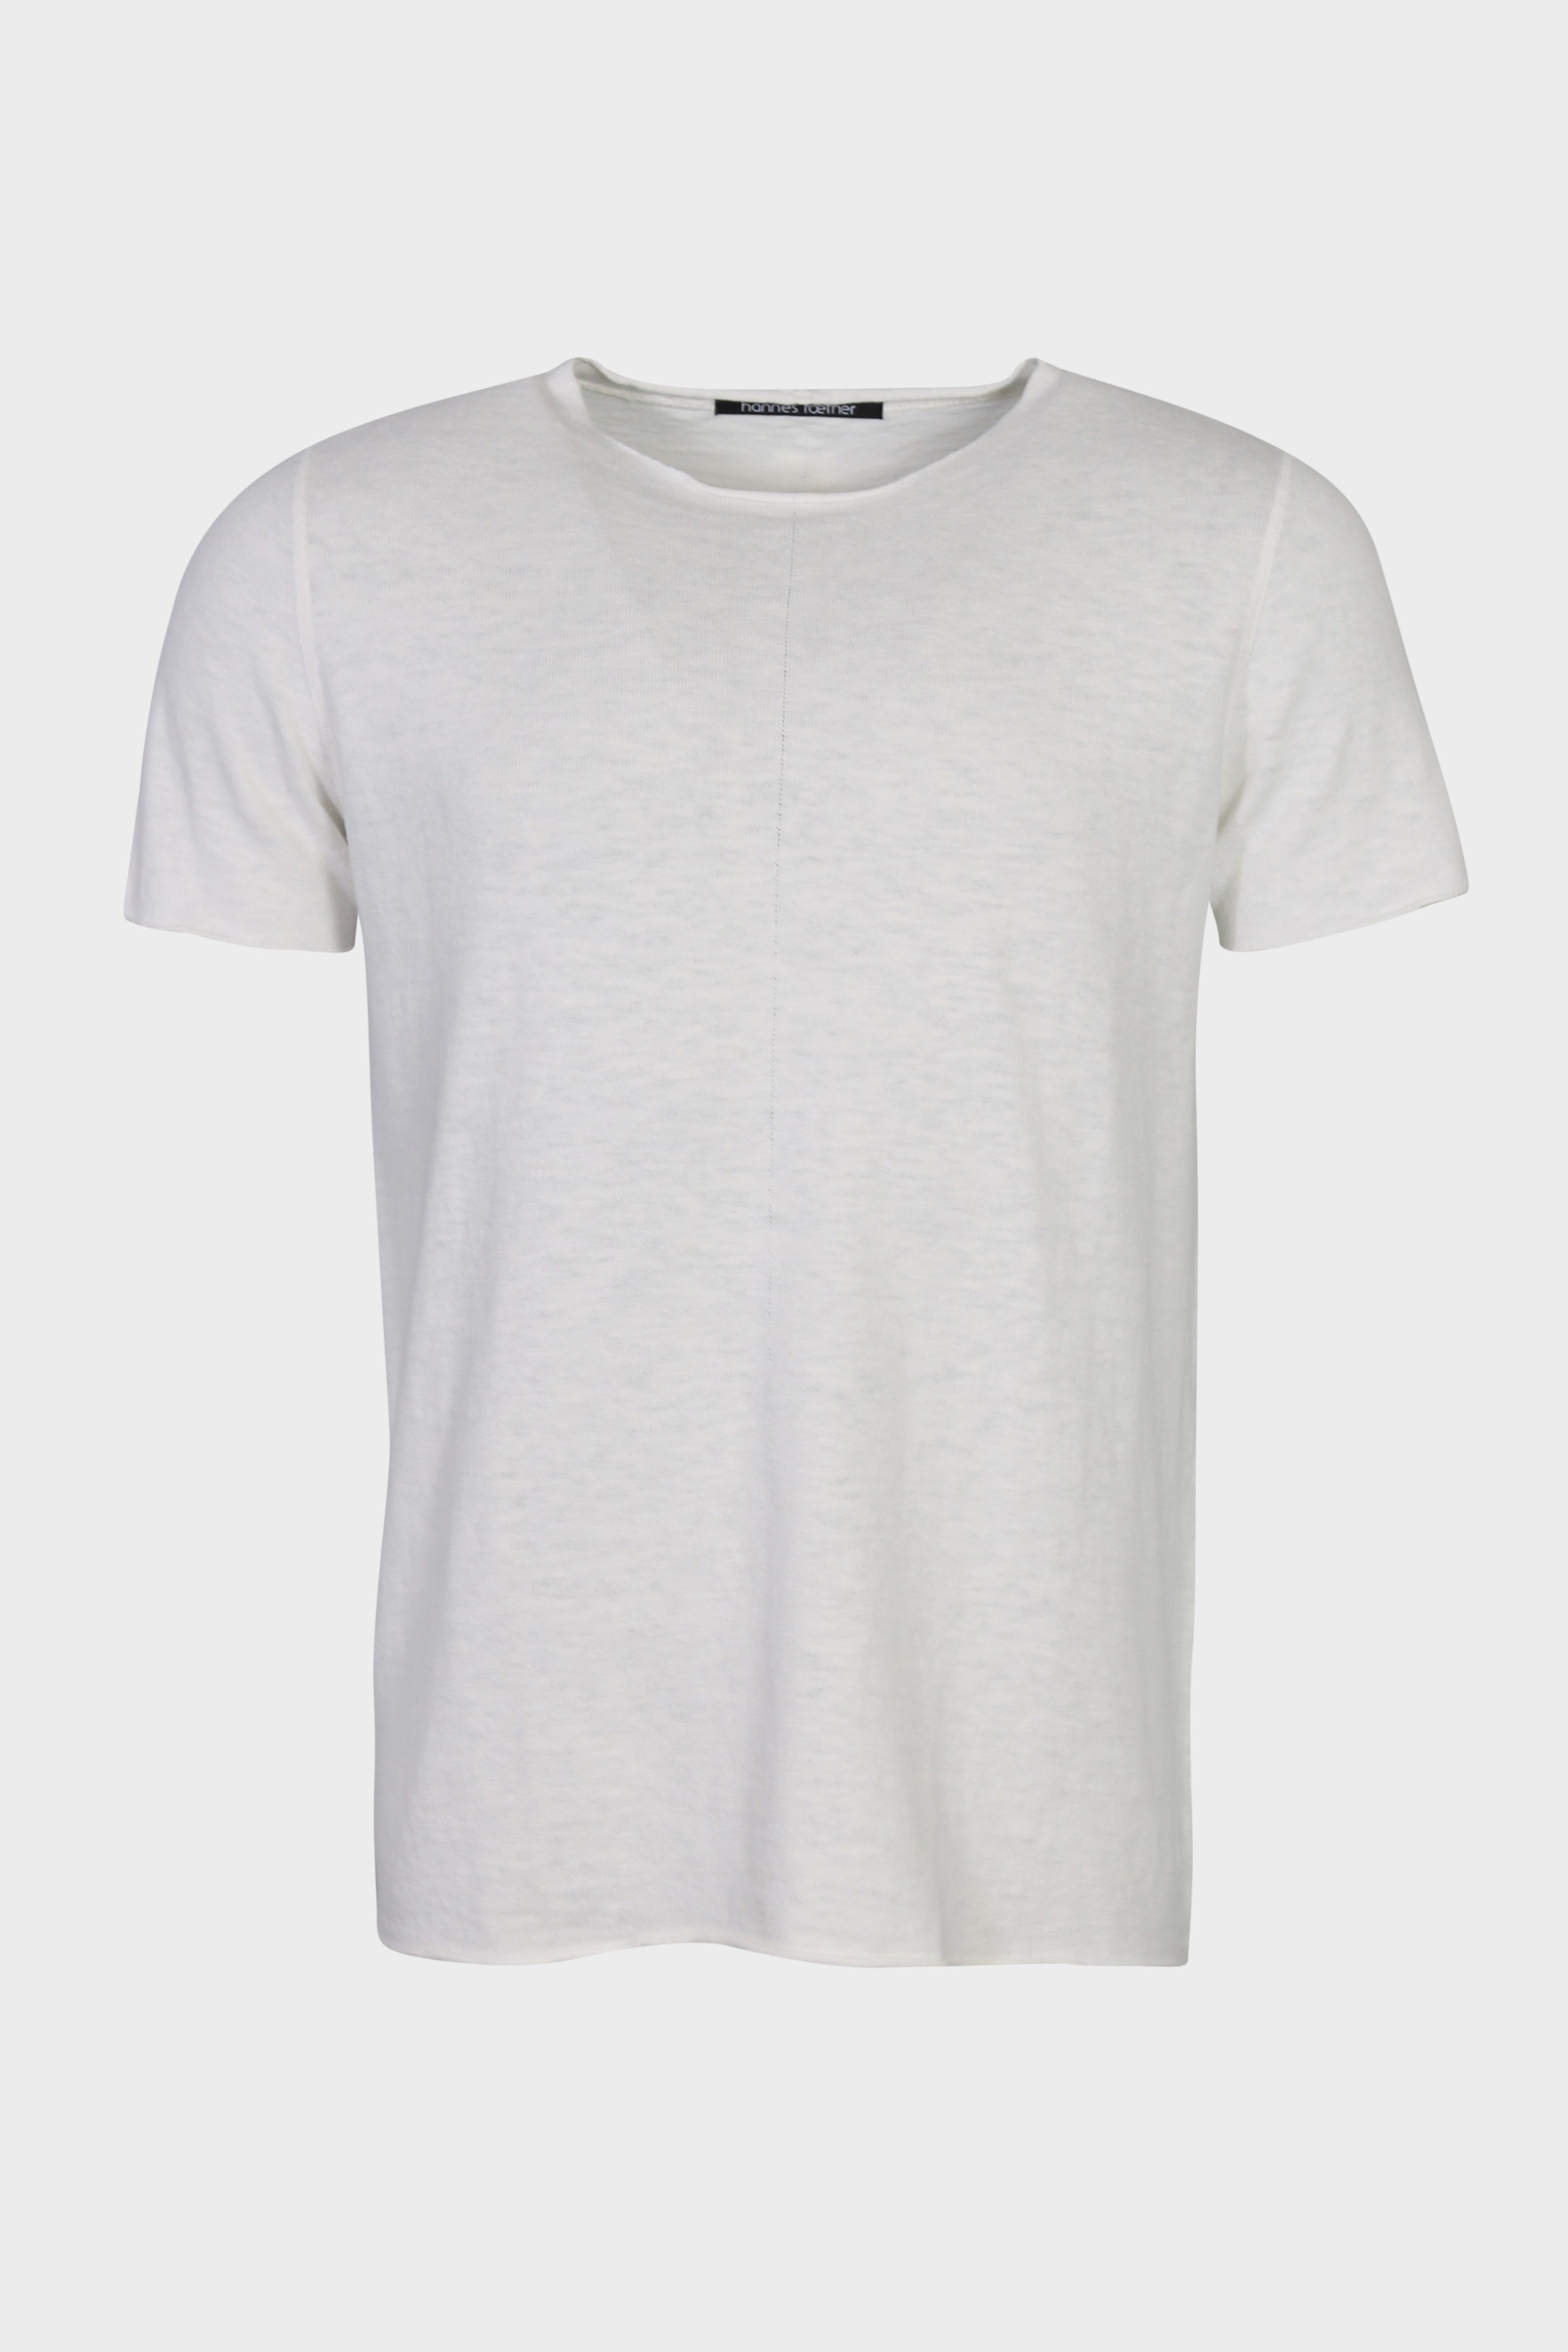 HANNES ROETHER Knit T-Shirt in Offwhite M